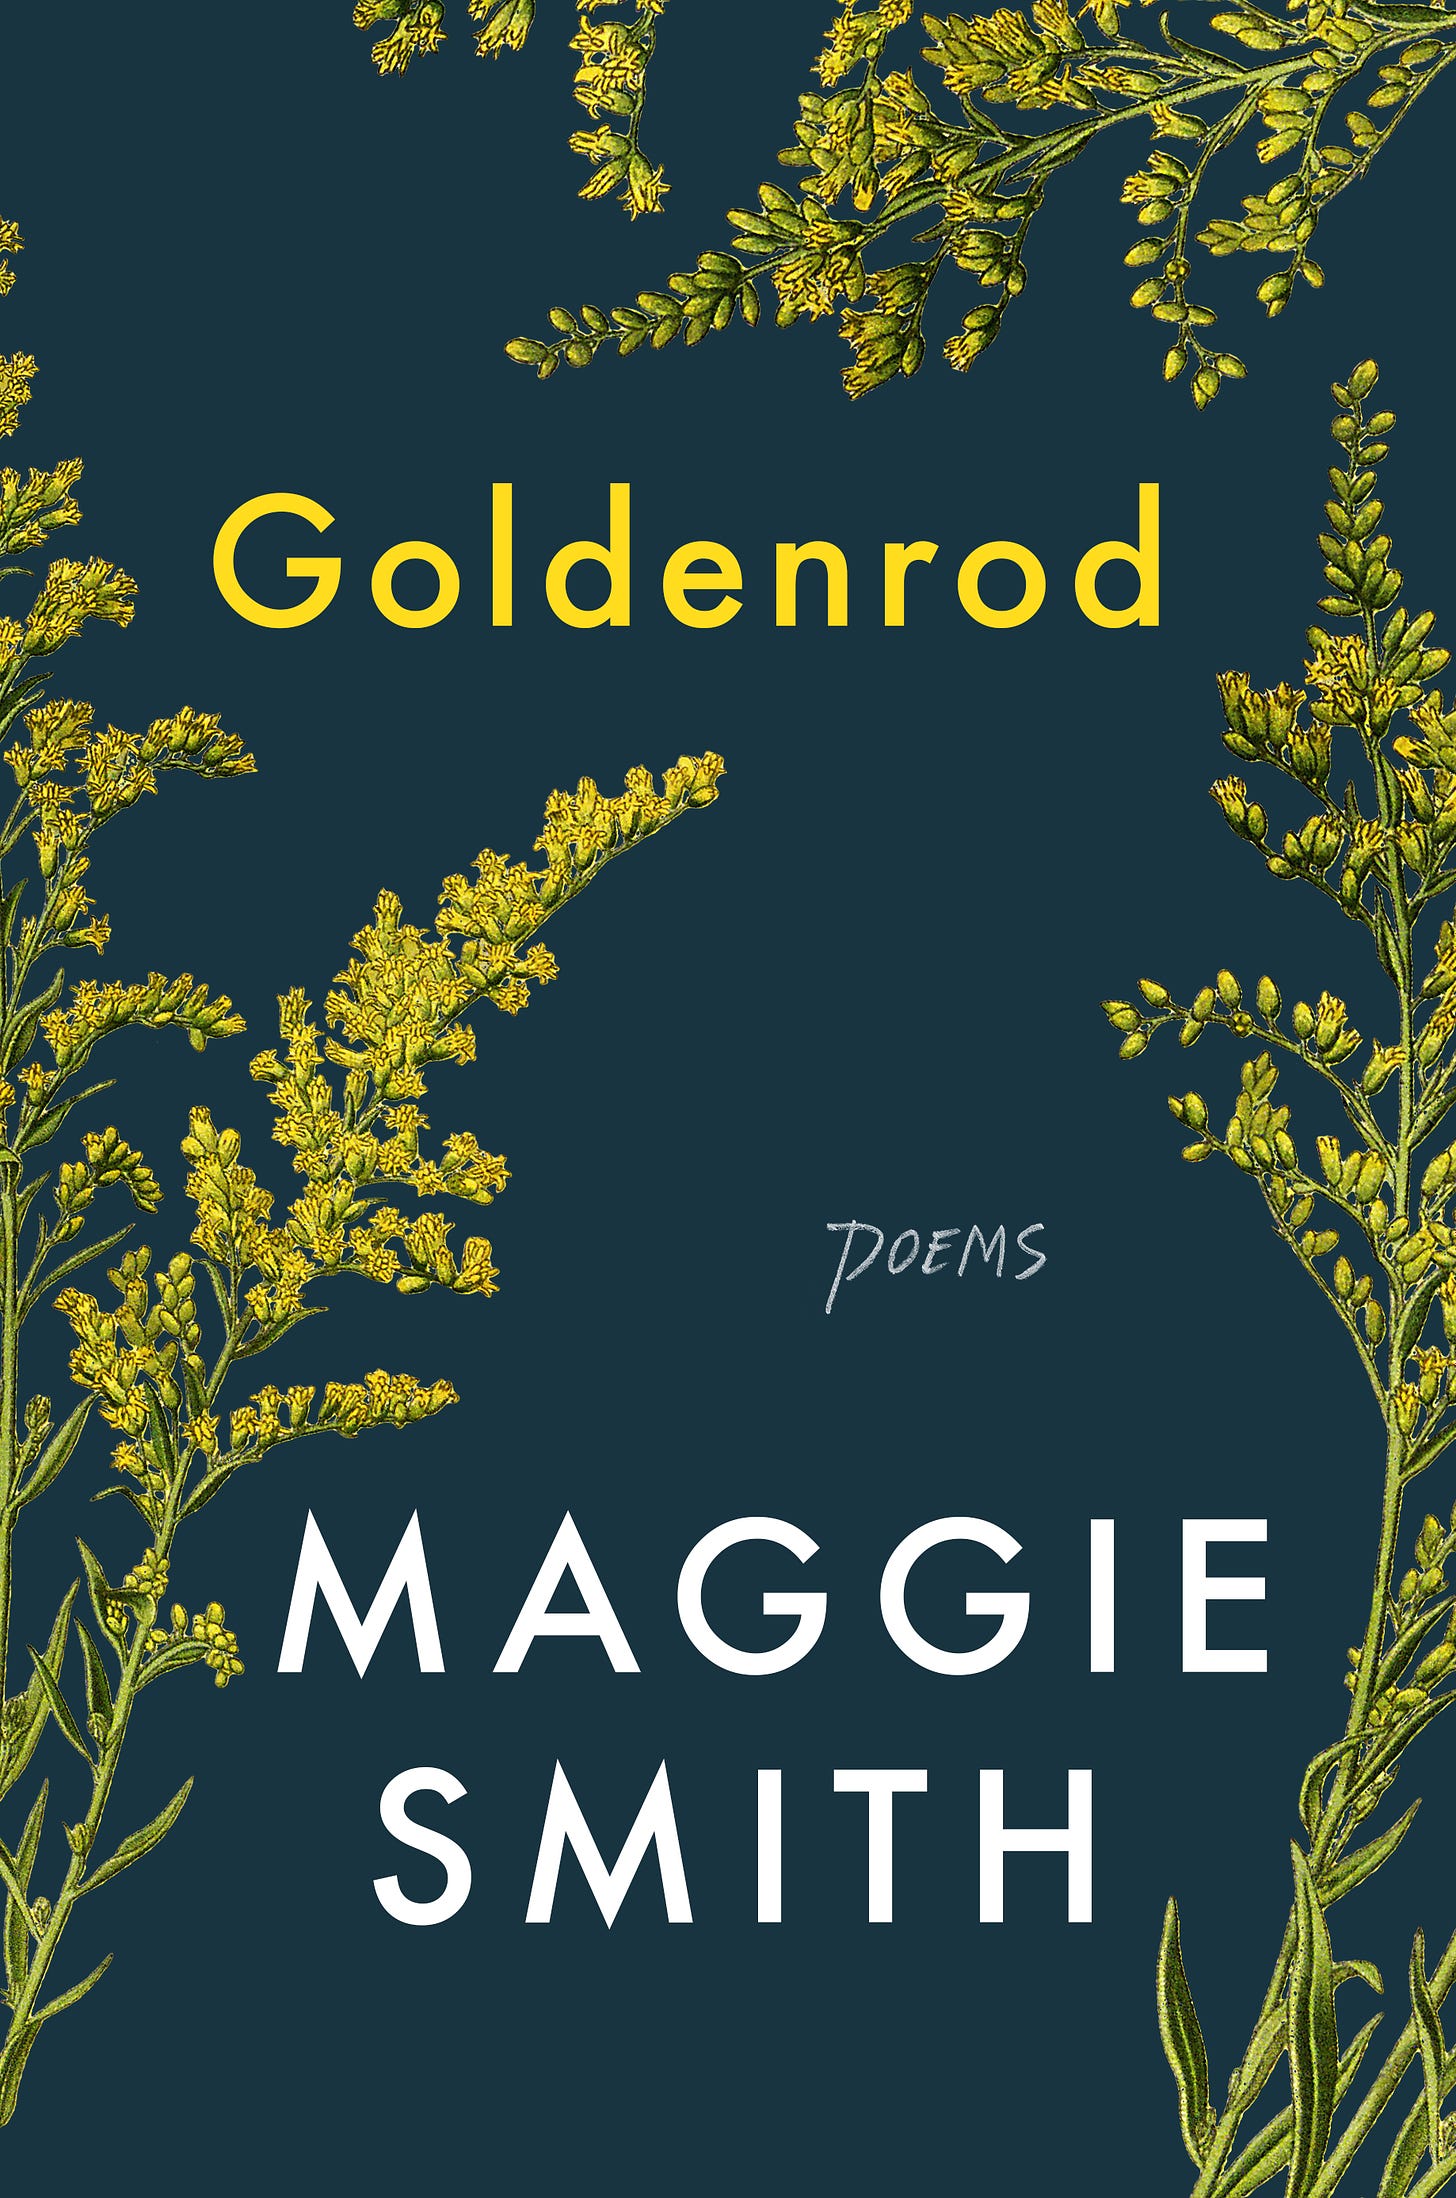 This is the cover of Goldenrod by Maggie Smith